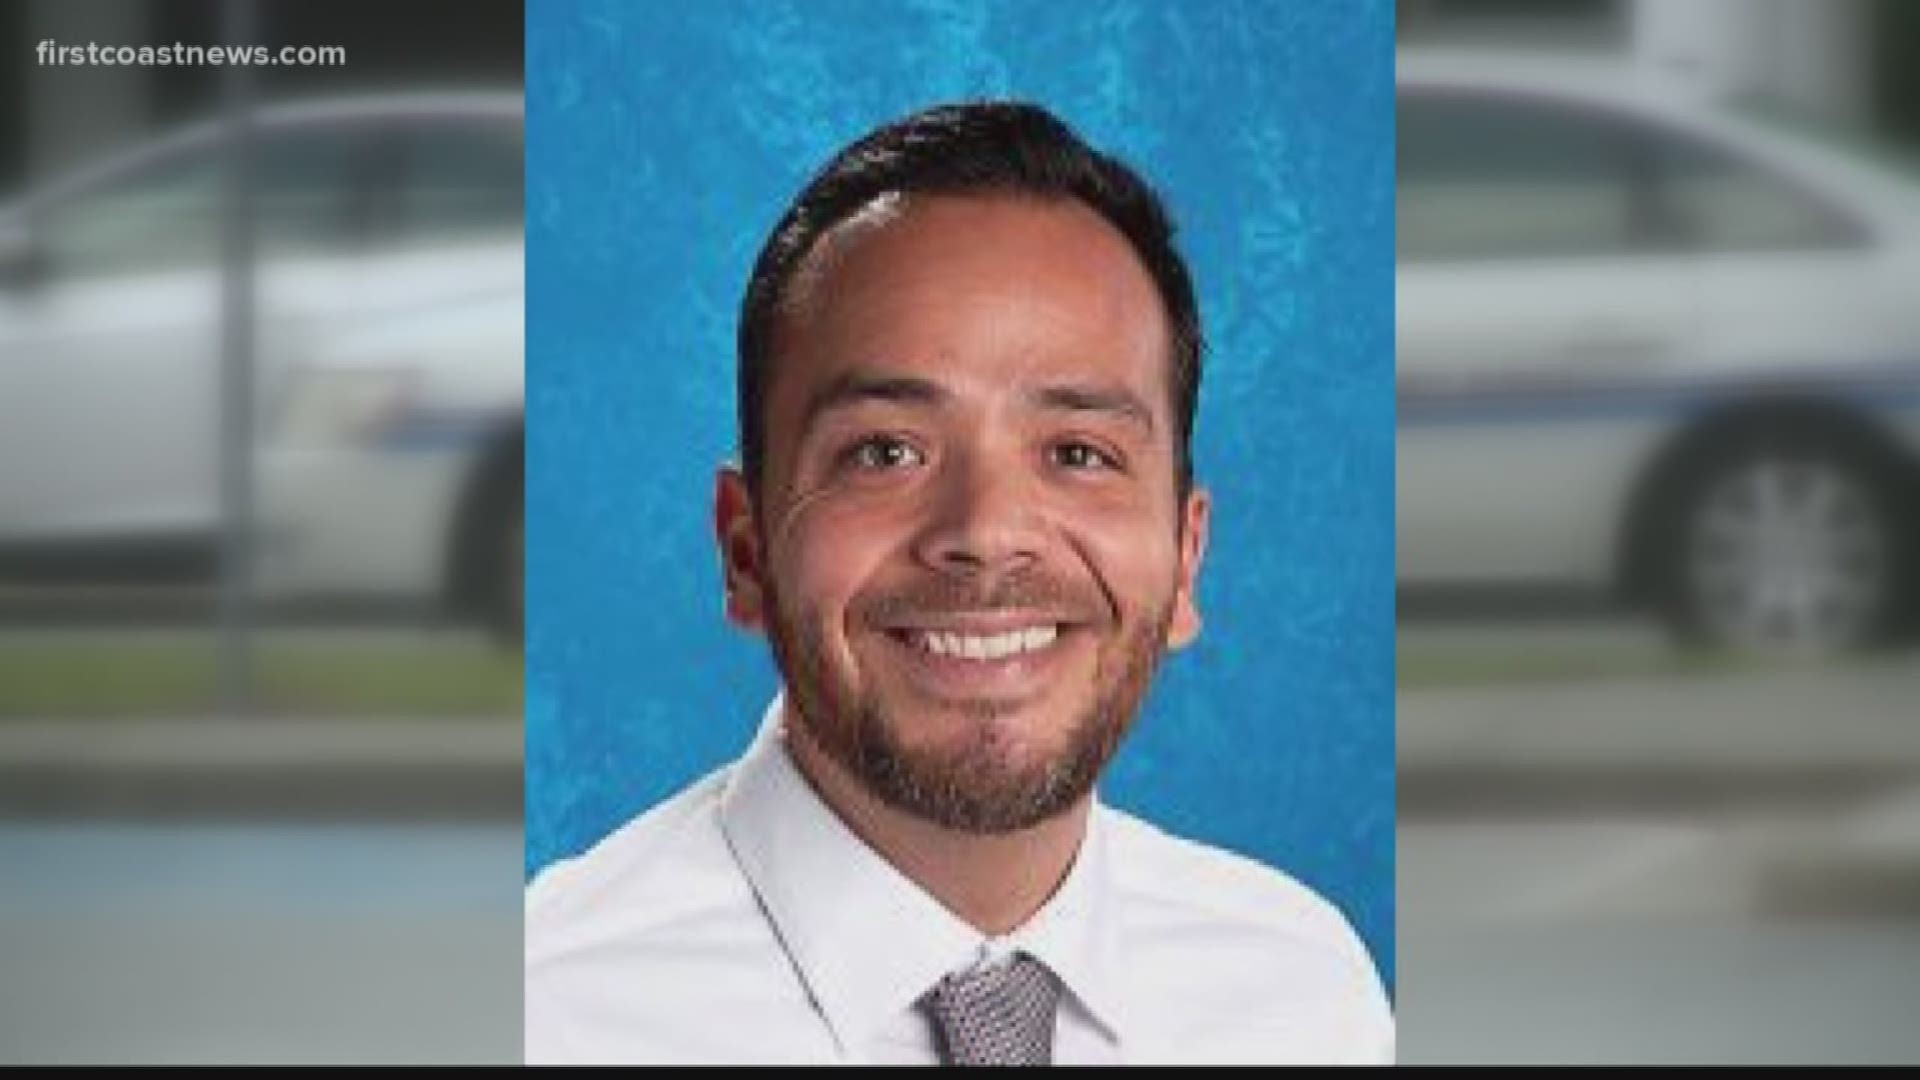 On August 8, the Glynn County Police Department arrested Eric Cabrera, 40, on an arrest warrant for Child Molestation. Cabrera is the assistant principal at Oglethorpe Pointe Elementary School.